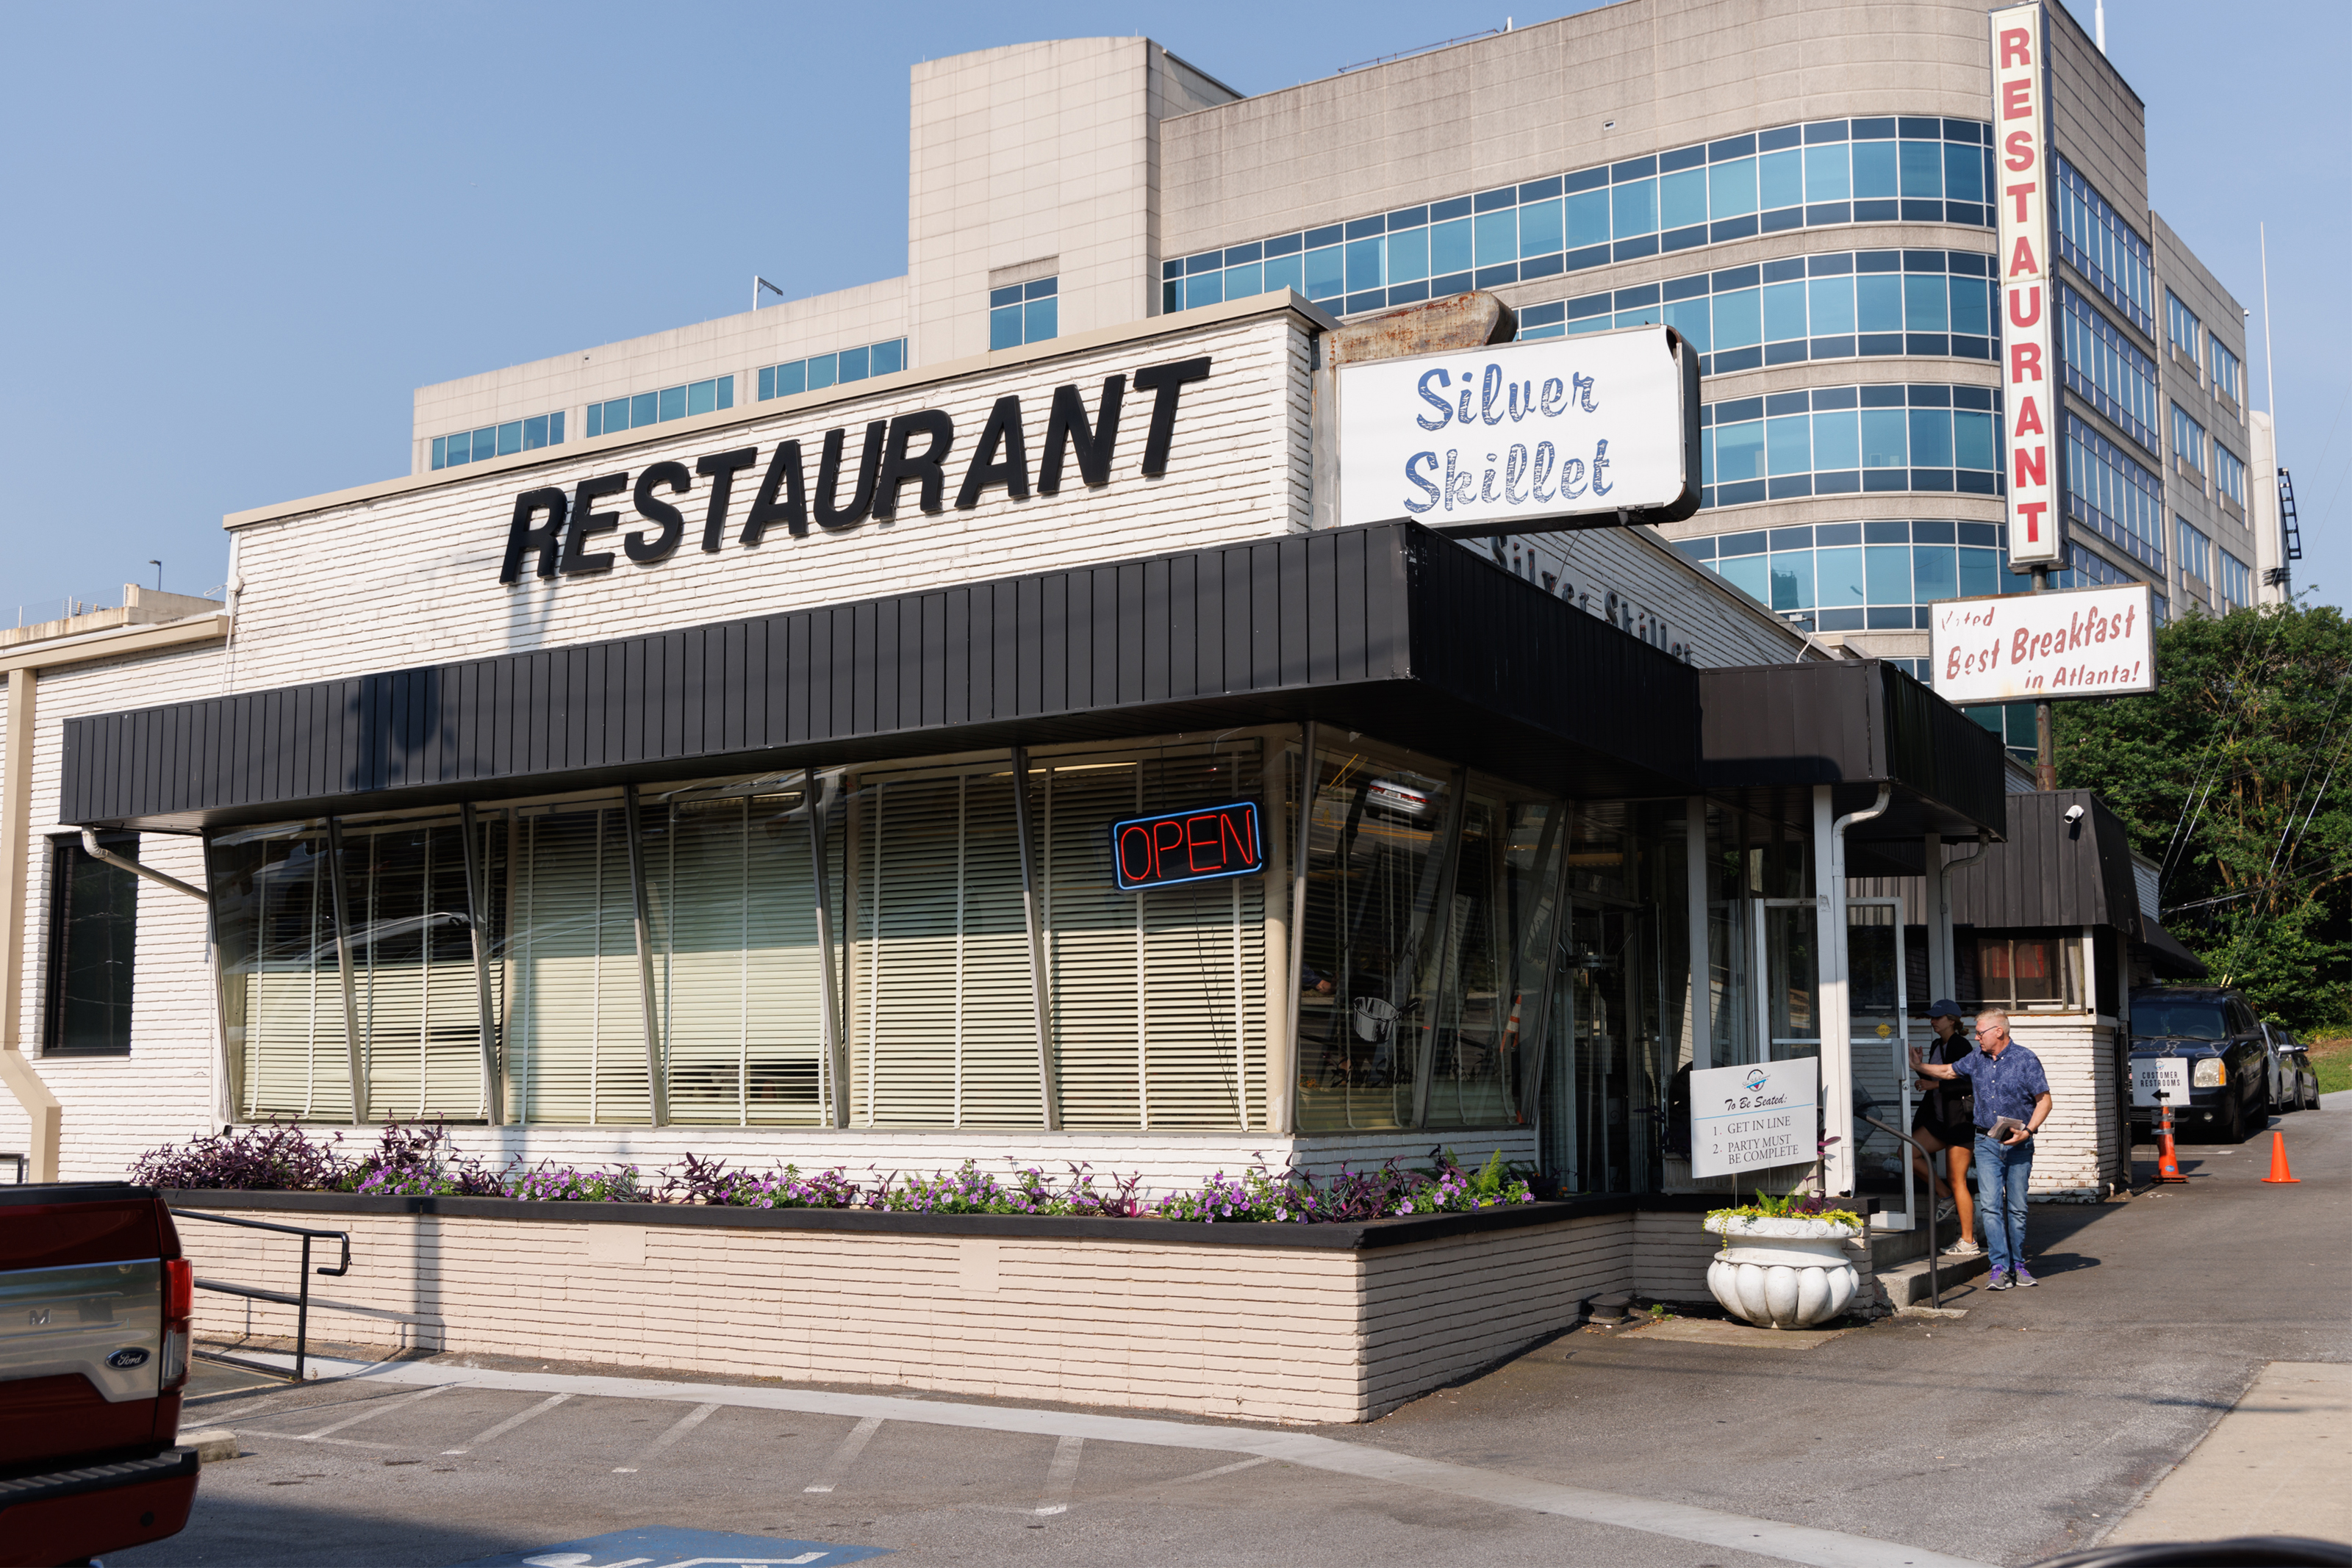 The Silver Skillet has been an Atlanta staple since 1956.